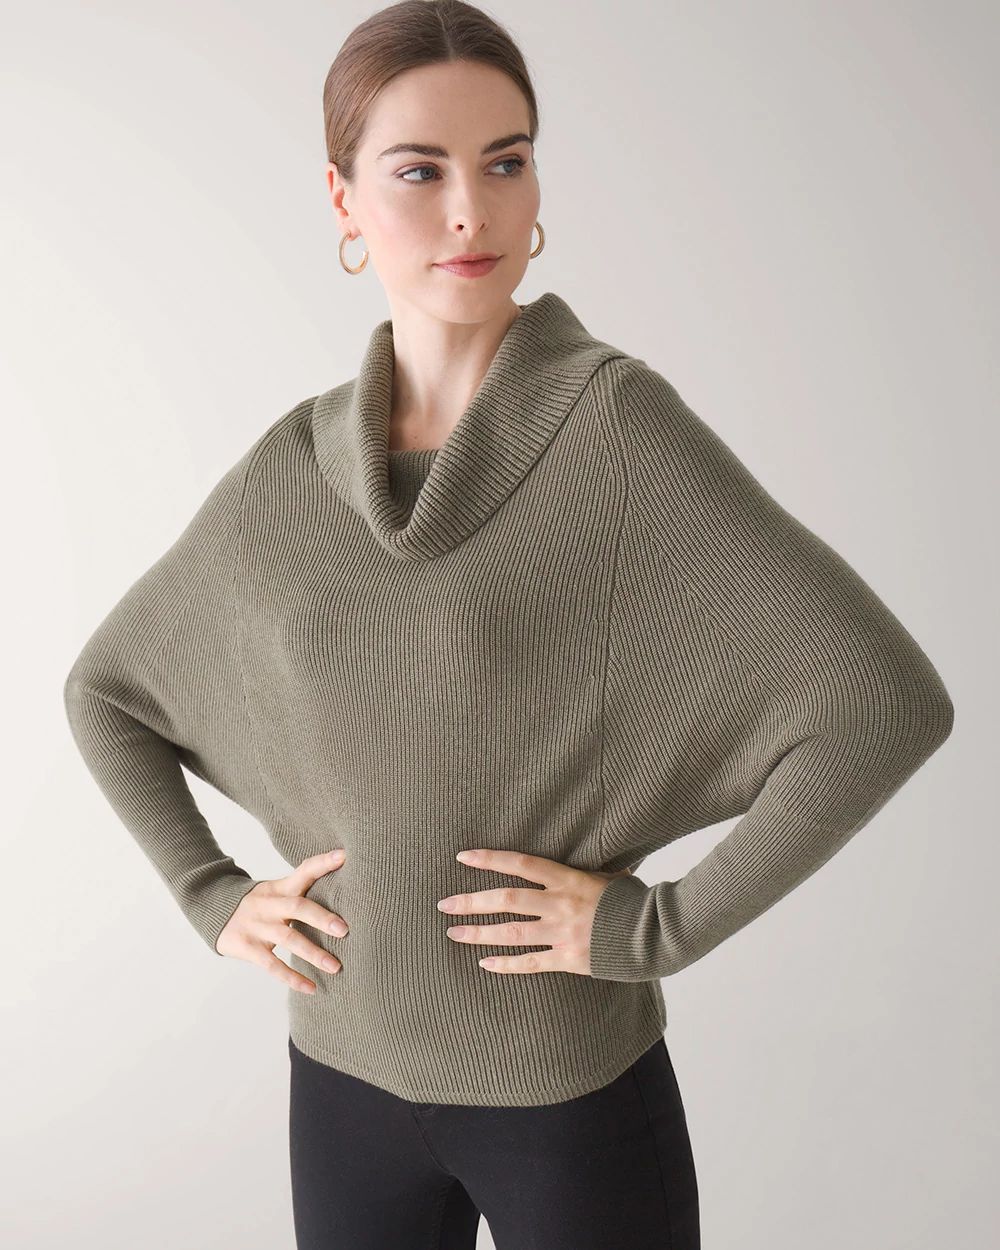 Cowl Neck Dolman Sleeve Sweater click to view larger image.